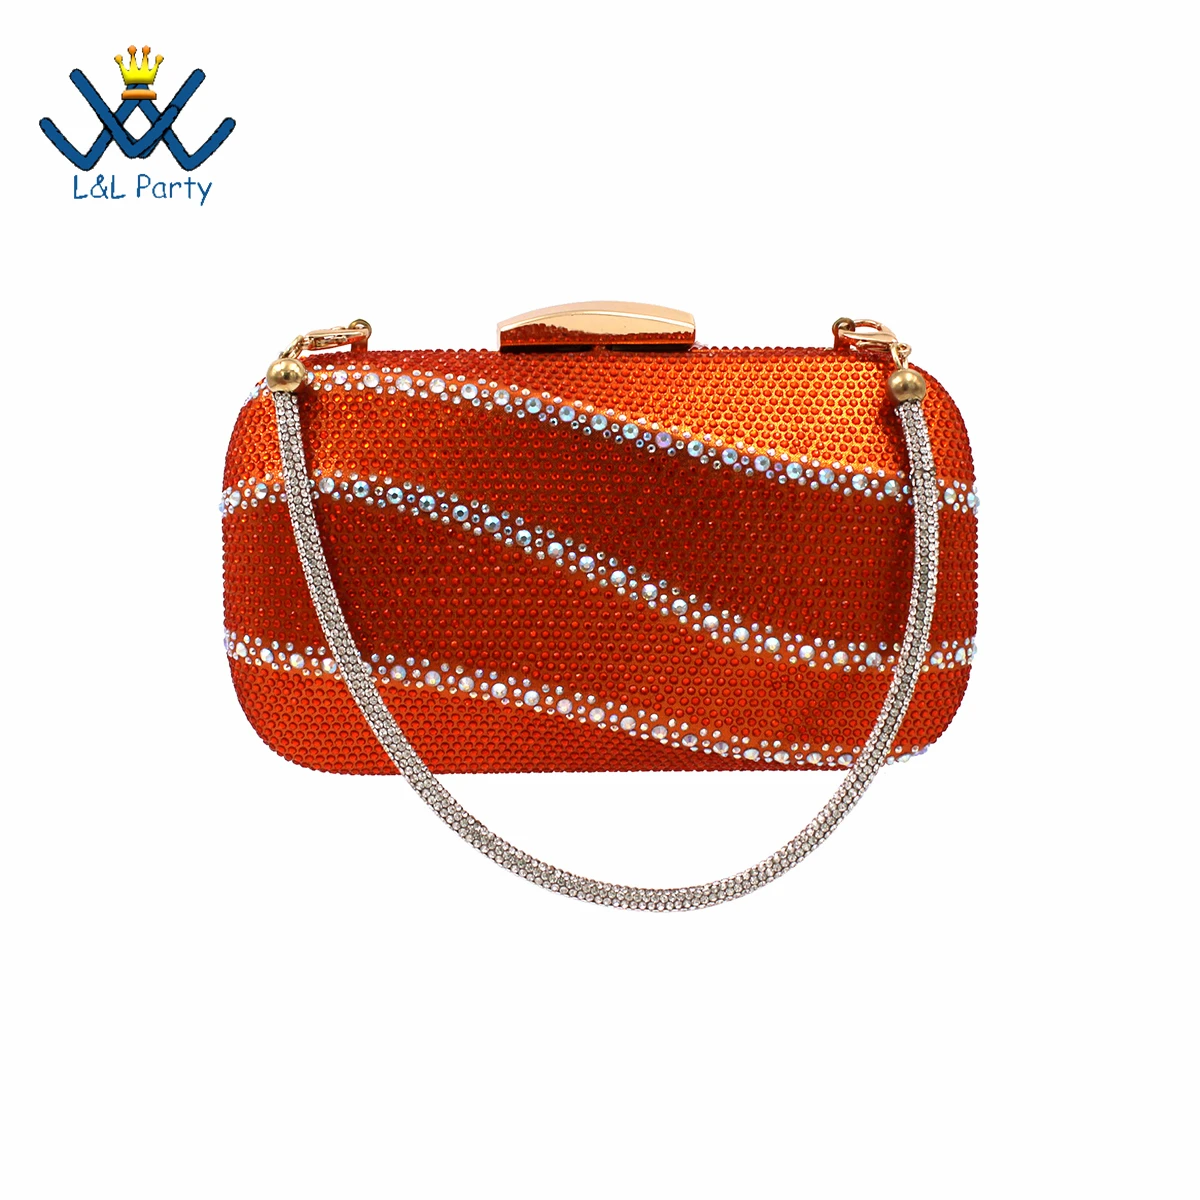 

Spring New Coming Italian Women Hand Bag with Shinning Cryatal Mature Style for Ladies Party in Orange Color